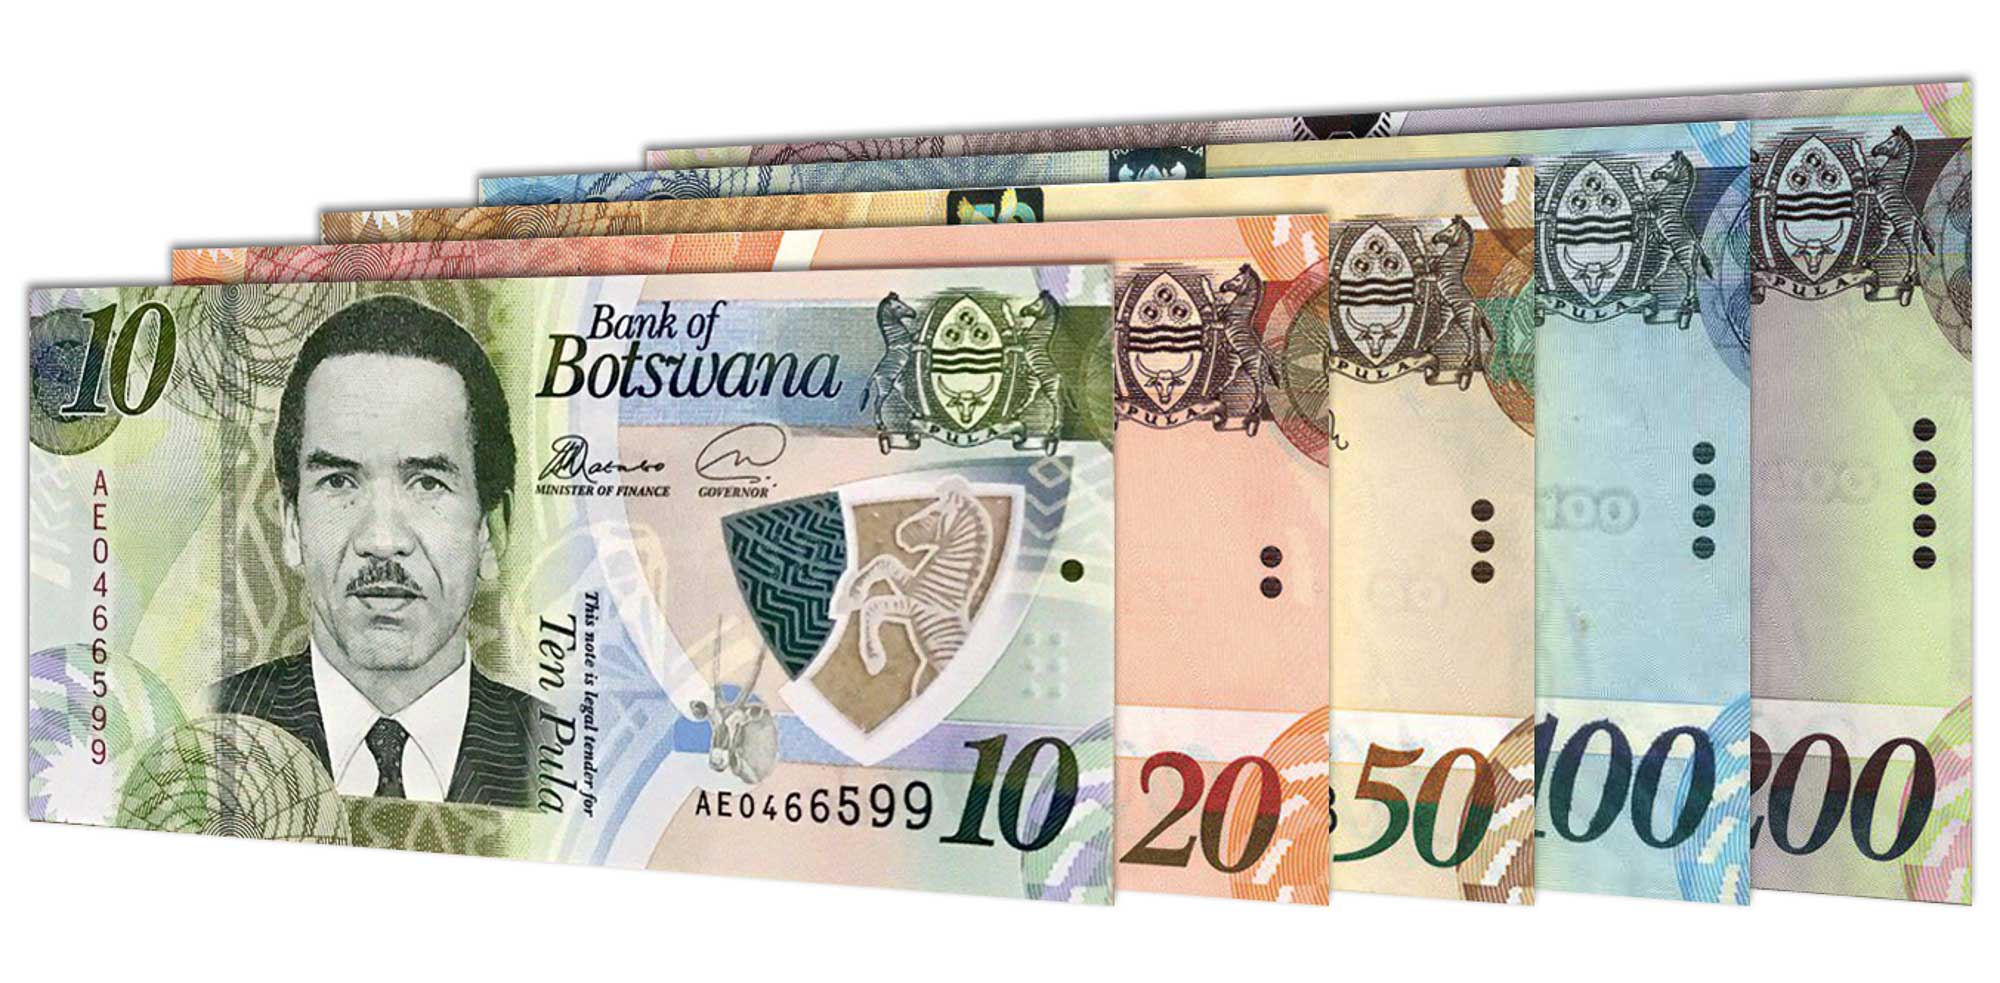 Mobile money in Botswana: significance of the 10% growth for a population of 3 million